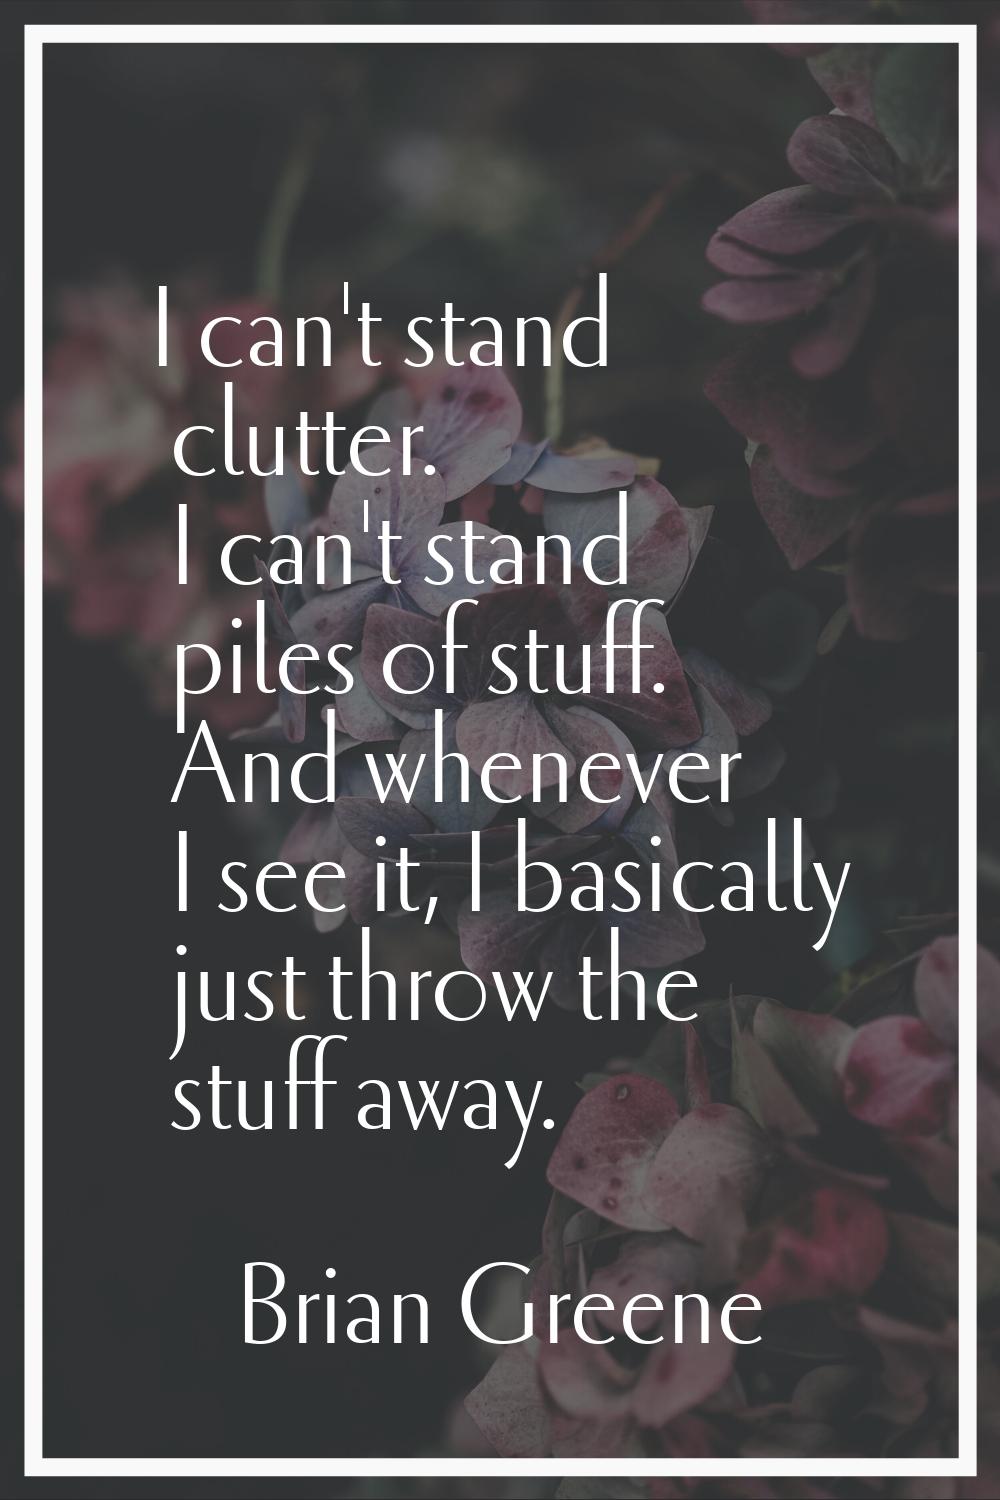 I can't stand clutter. I can't stand piles of stuff. And whenever I see it, I basically just throw 